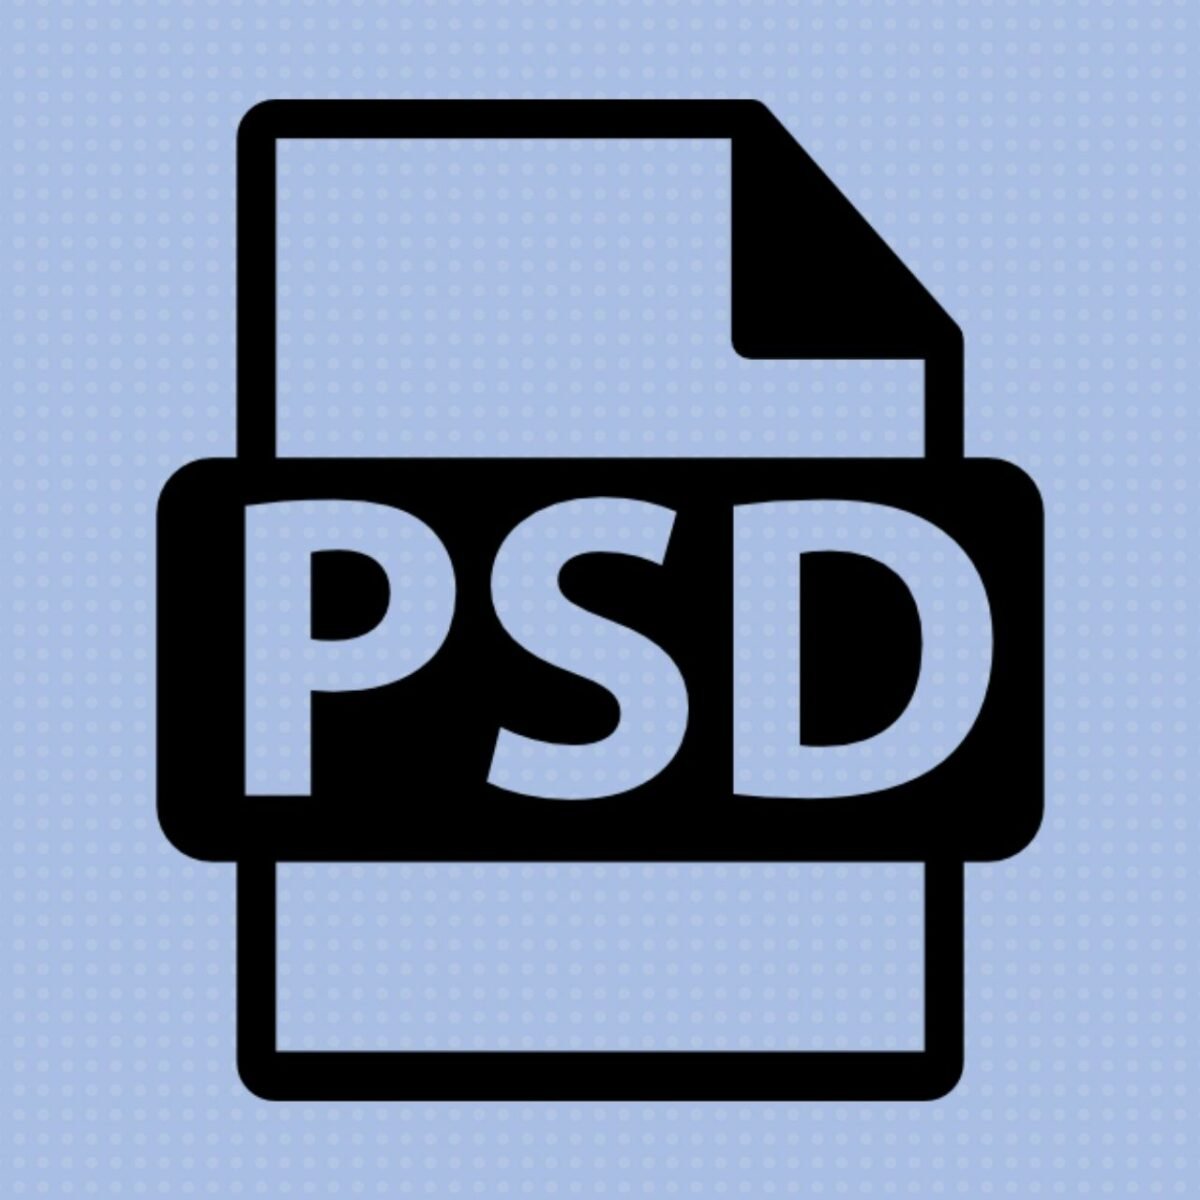 Download Here S How To Open Psd Files In Windows 10